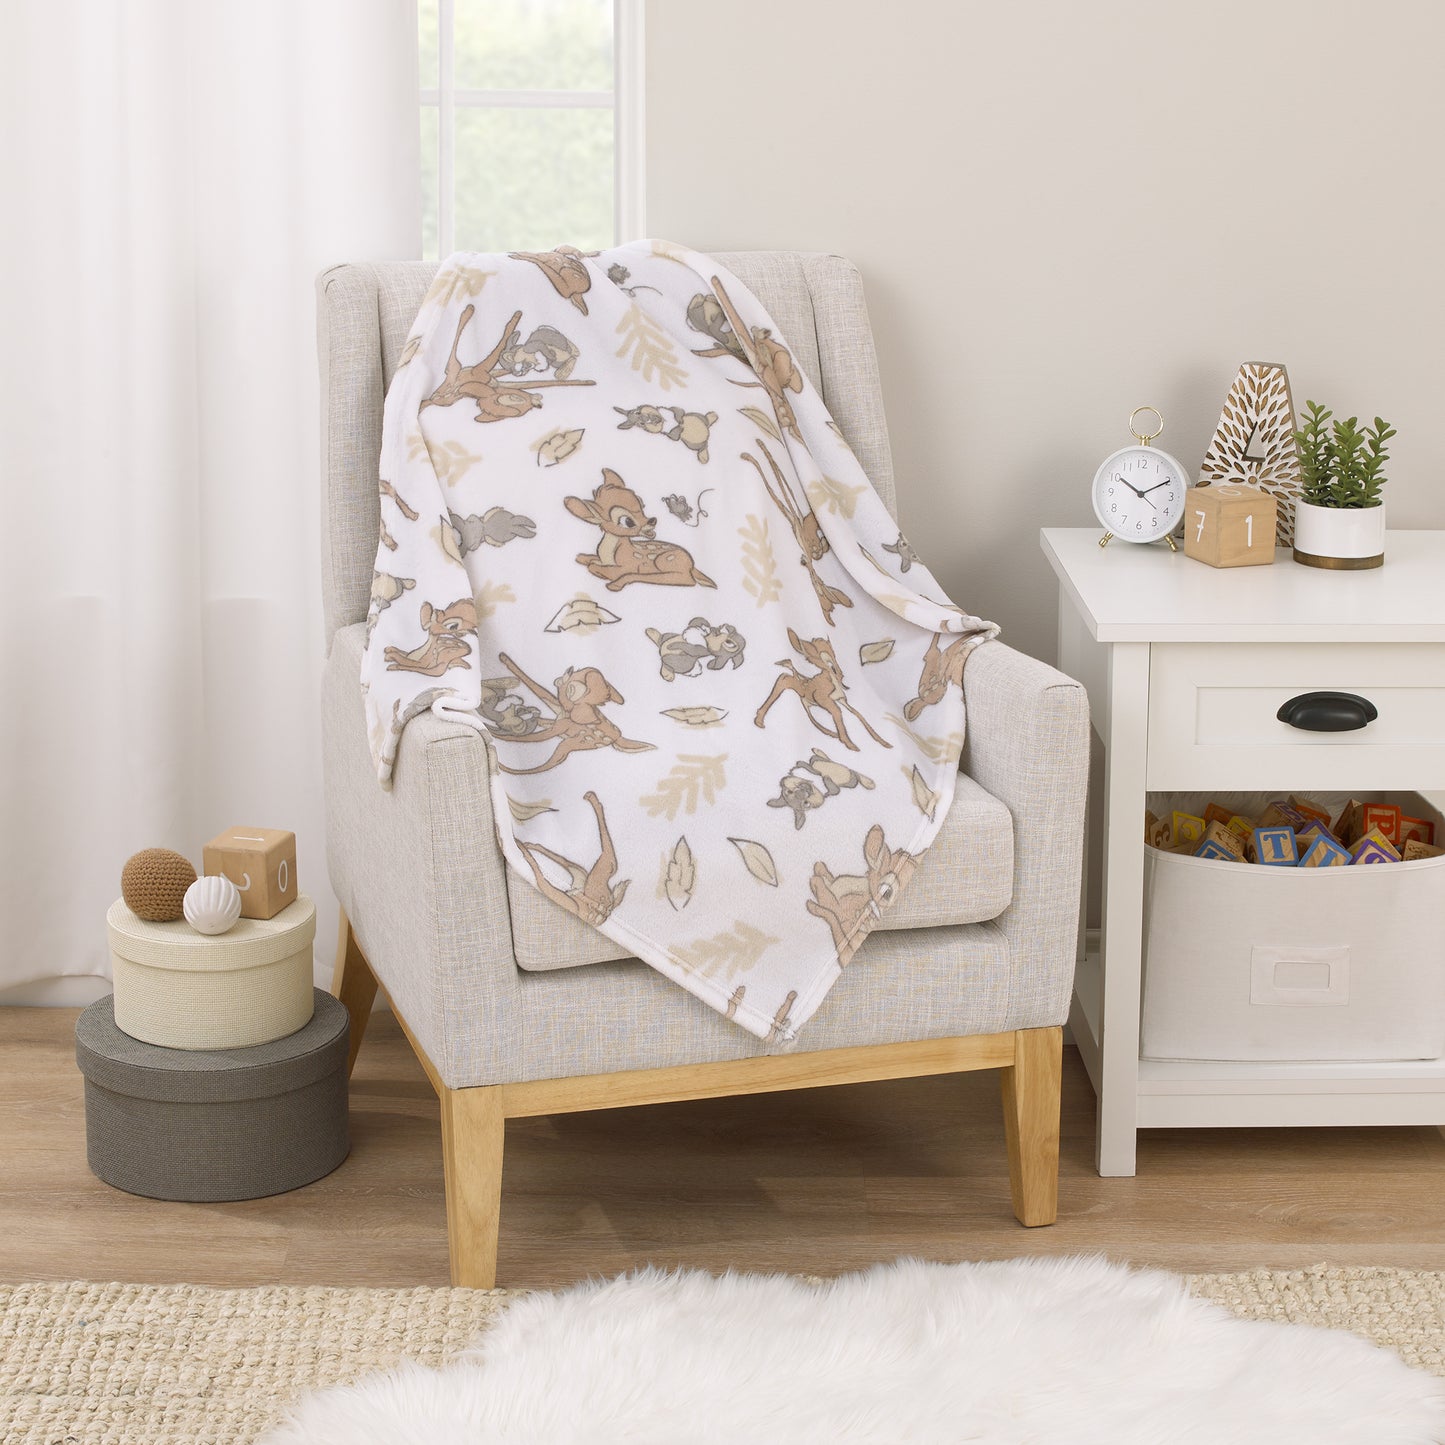 Disney B is for Bambi Tan, Gray, and White Super Soft Plush Baby Blanket